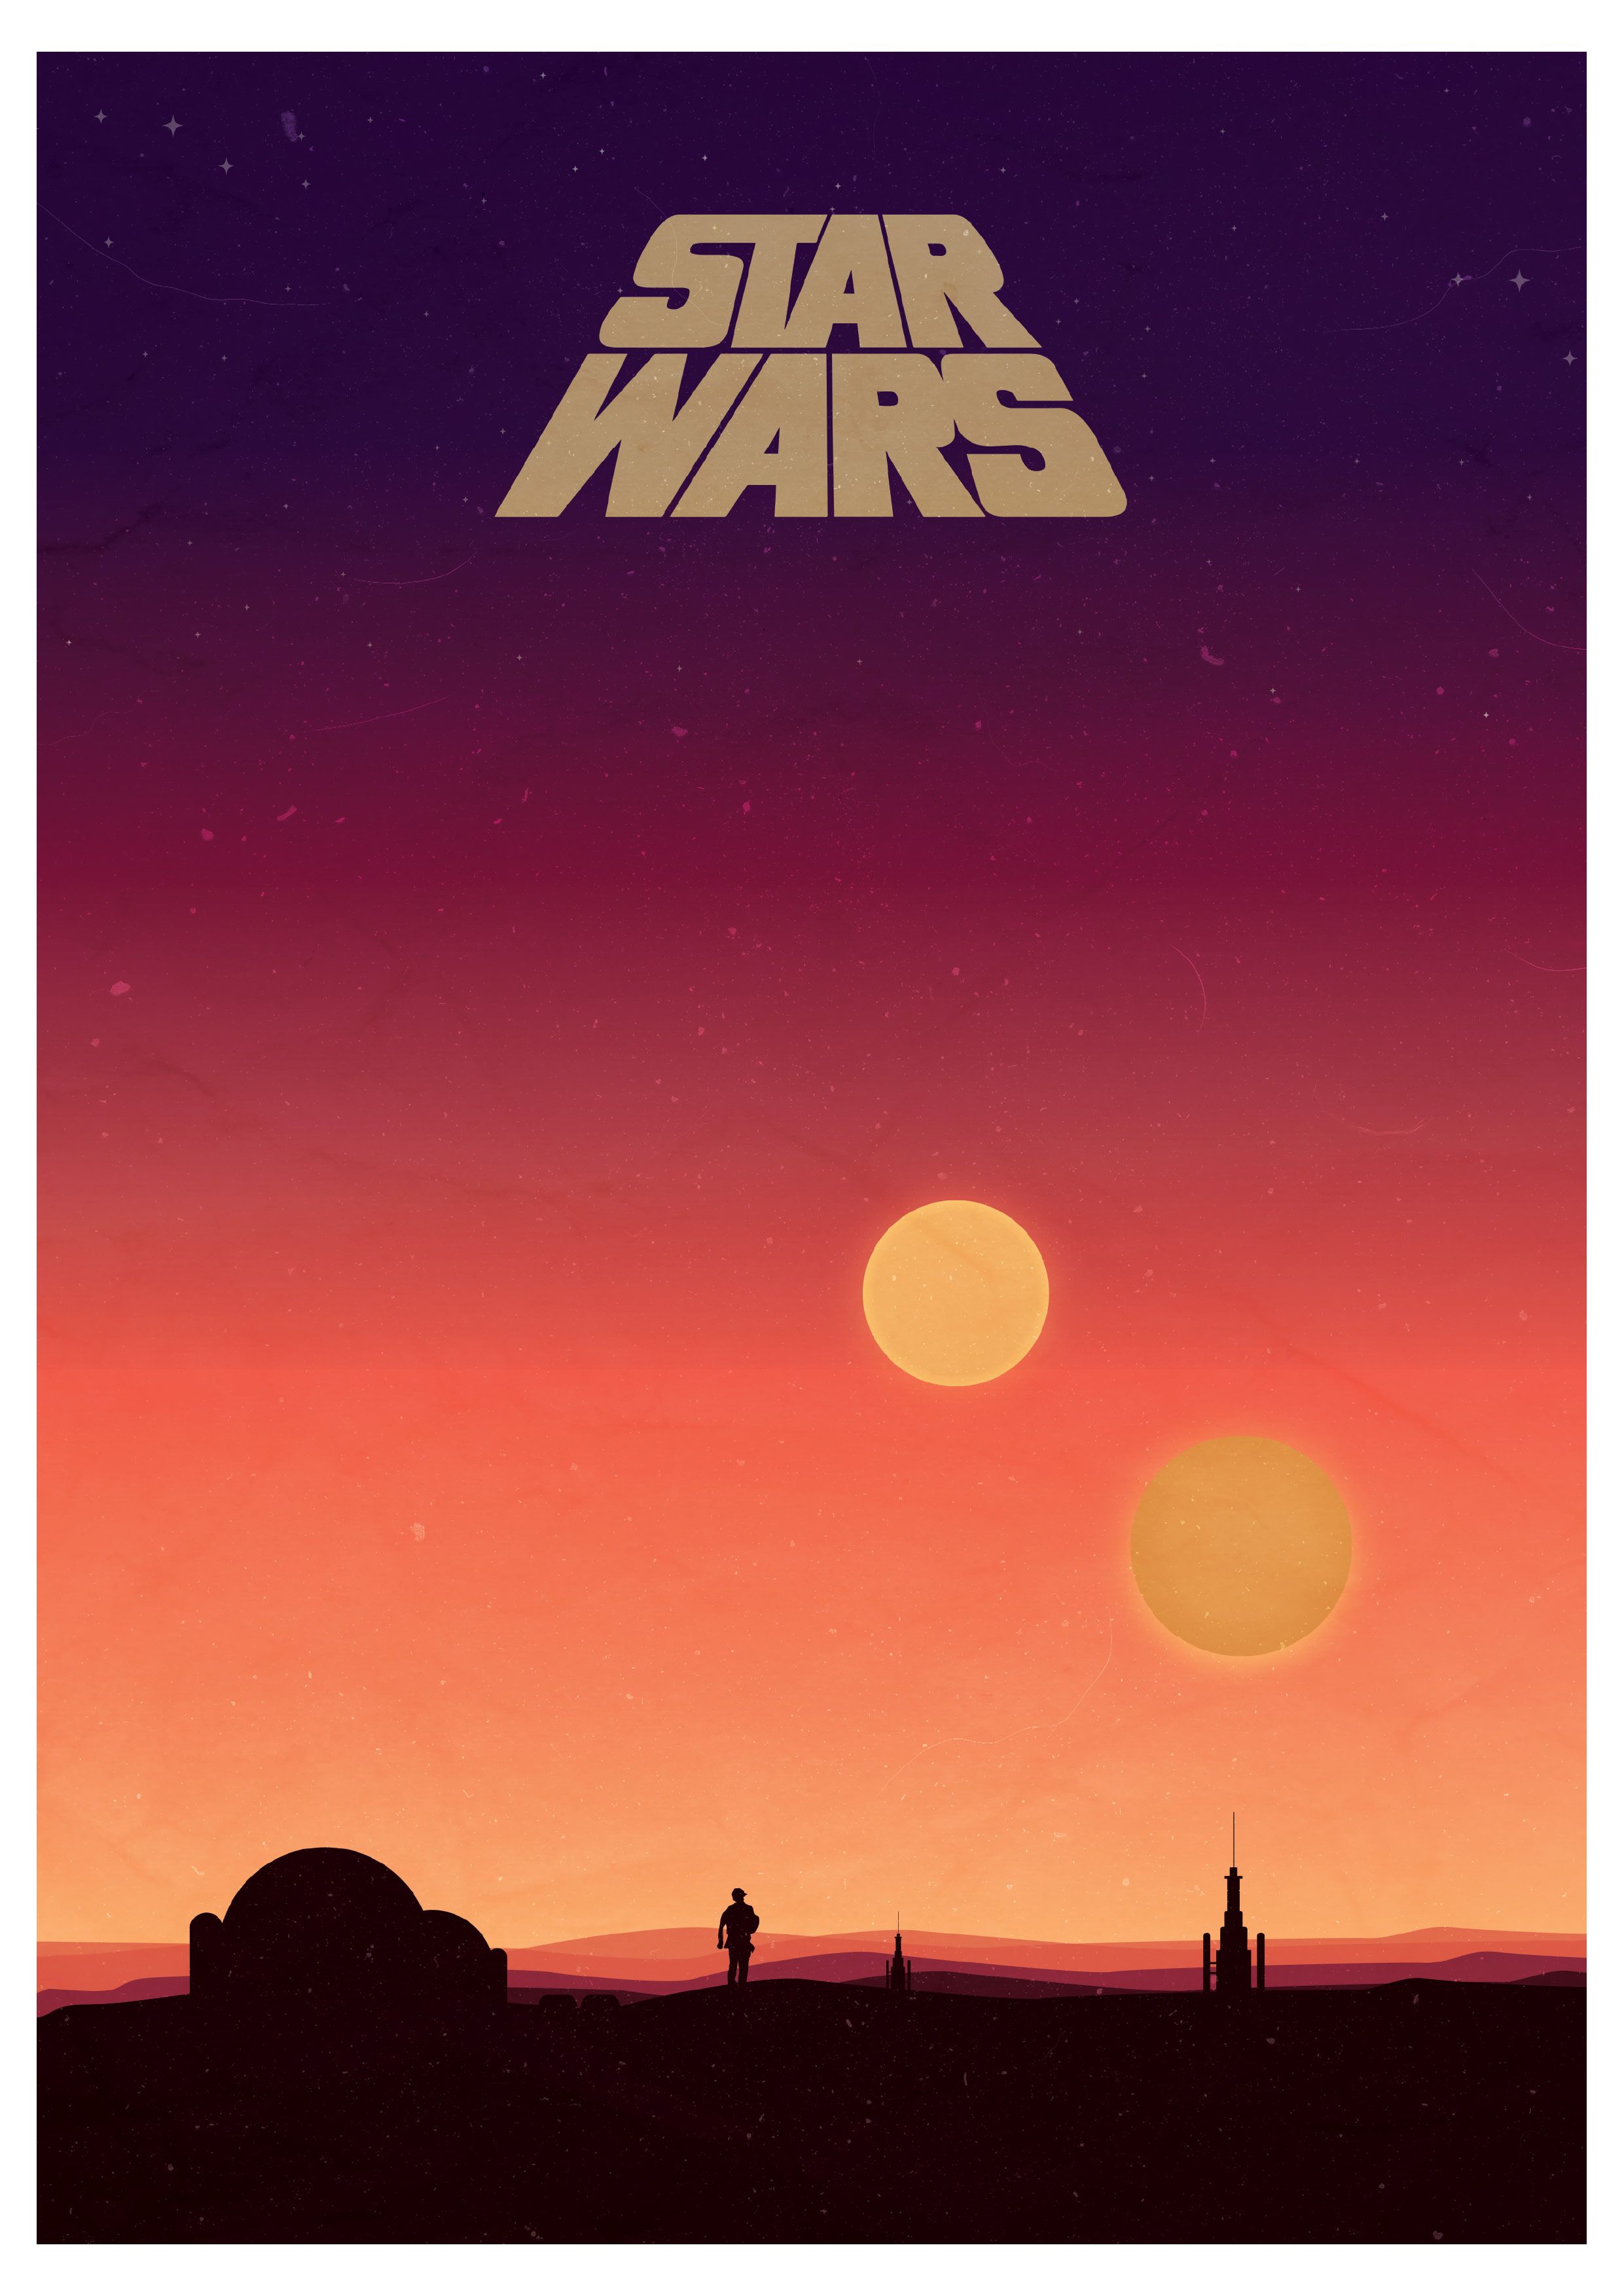 Star Wars Binary Sunset Poster i made this one the weekend, was super fun!. Star wars painting, Star wars background, Star wars wallpaper